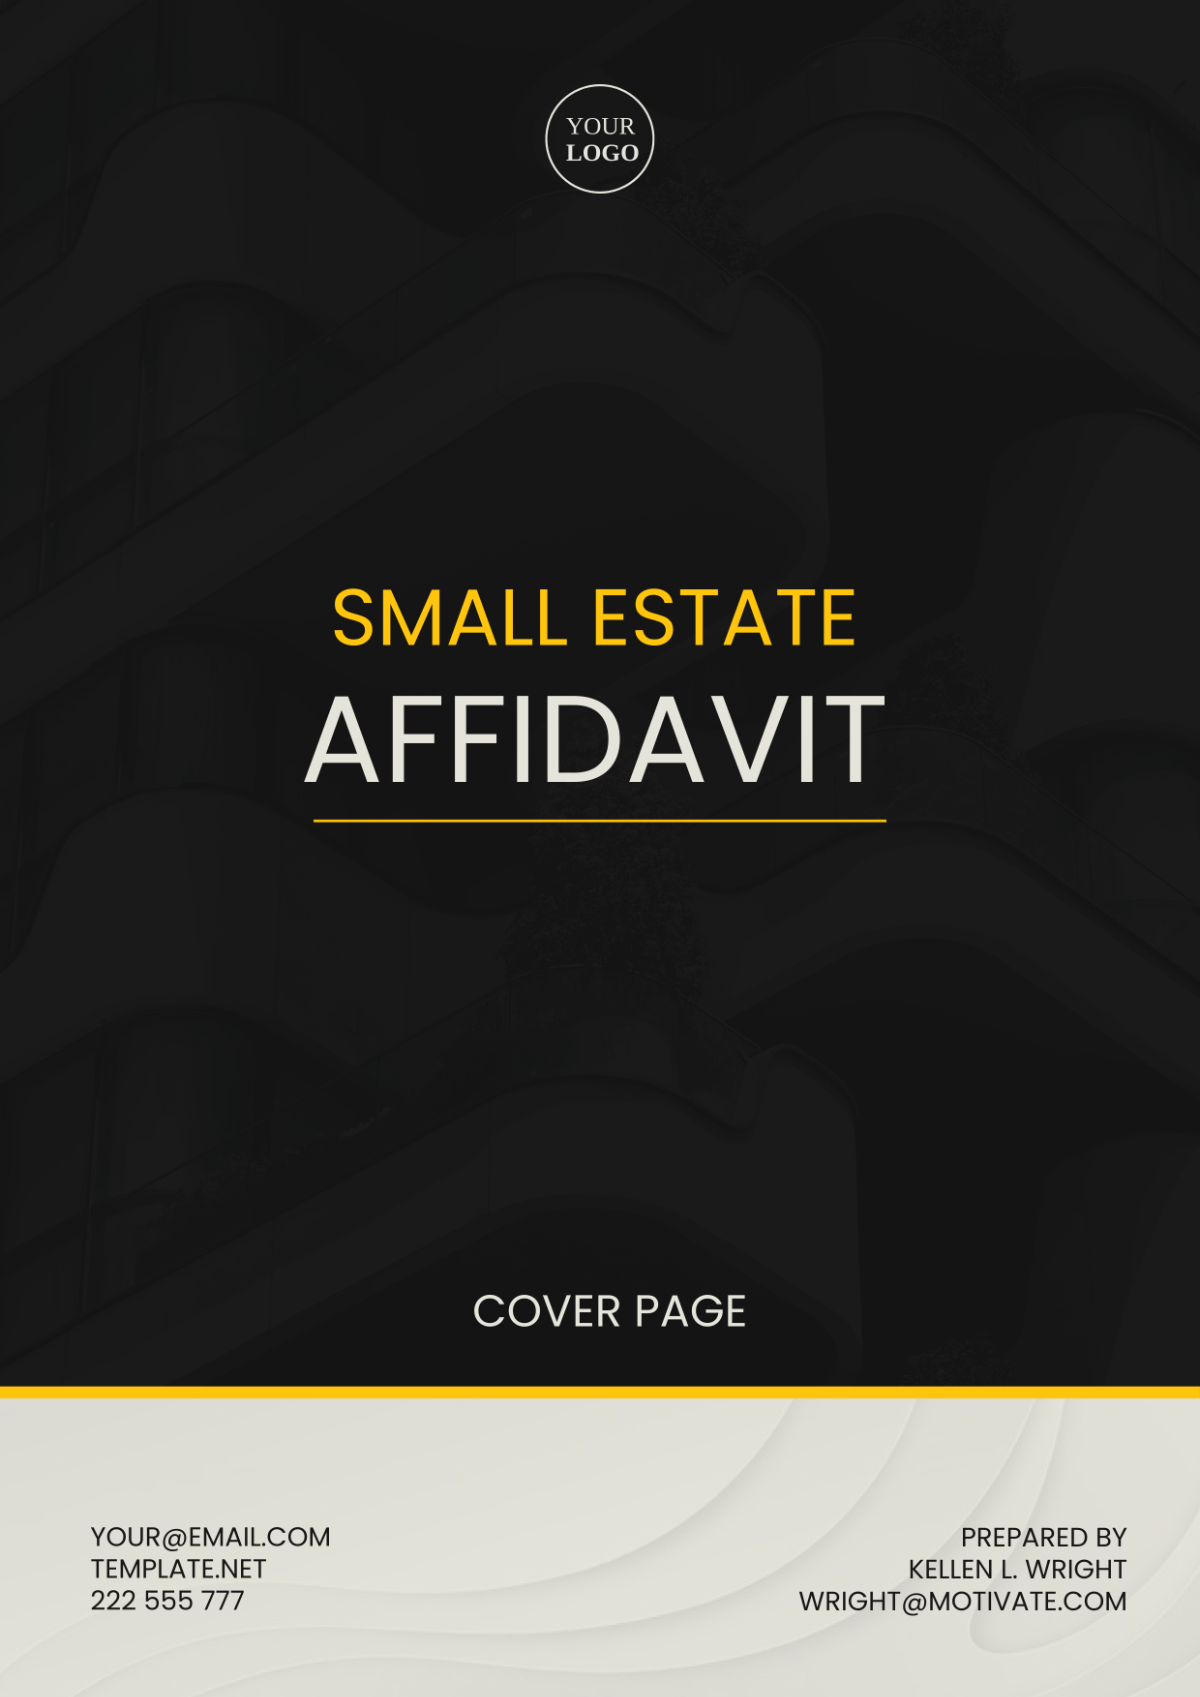 Small Estate Affidavit Cover Page Template